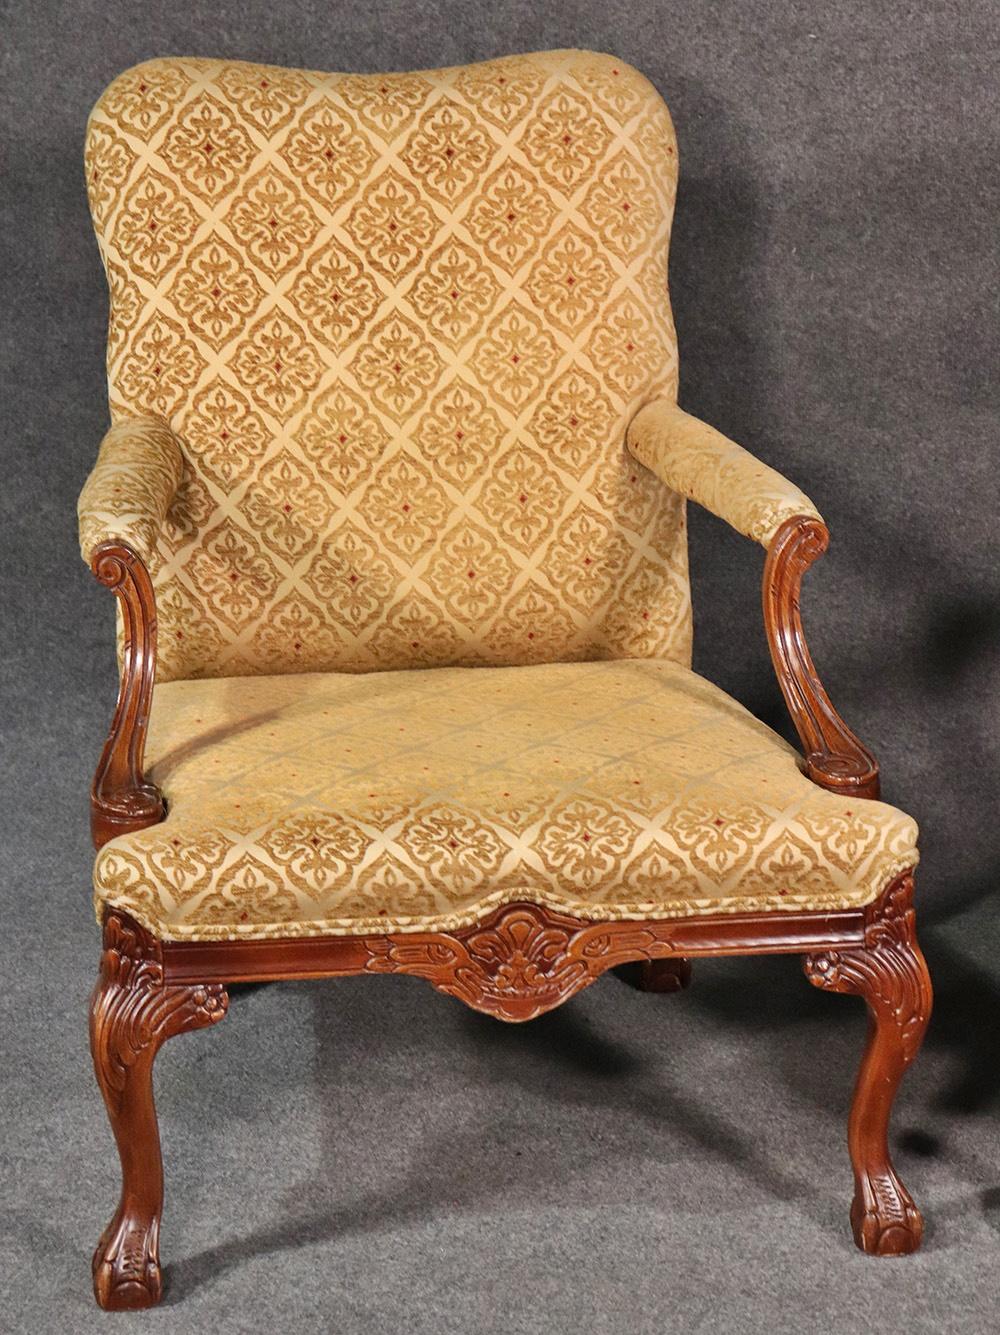 Pair of English Georgian style carved walnut lounge chairs with textured upholstery.